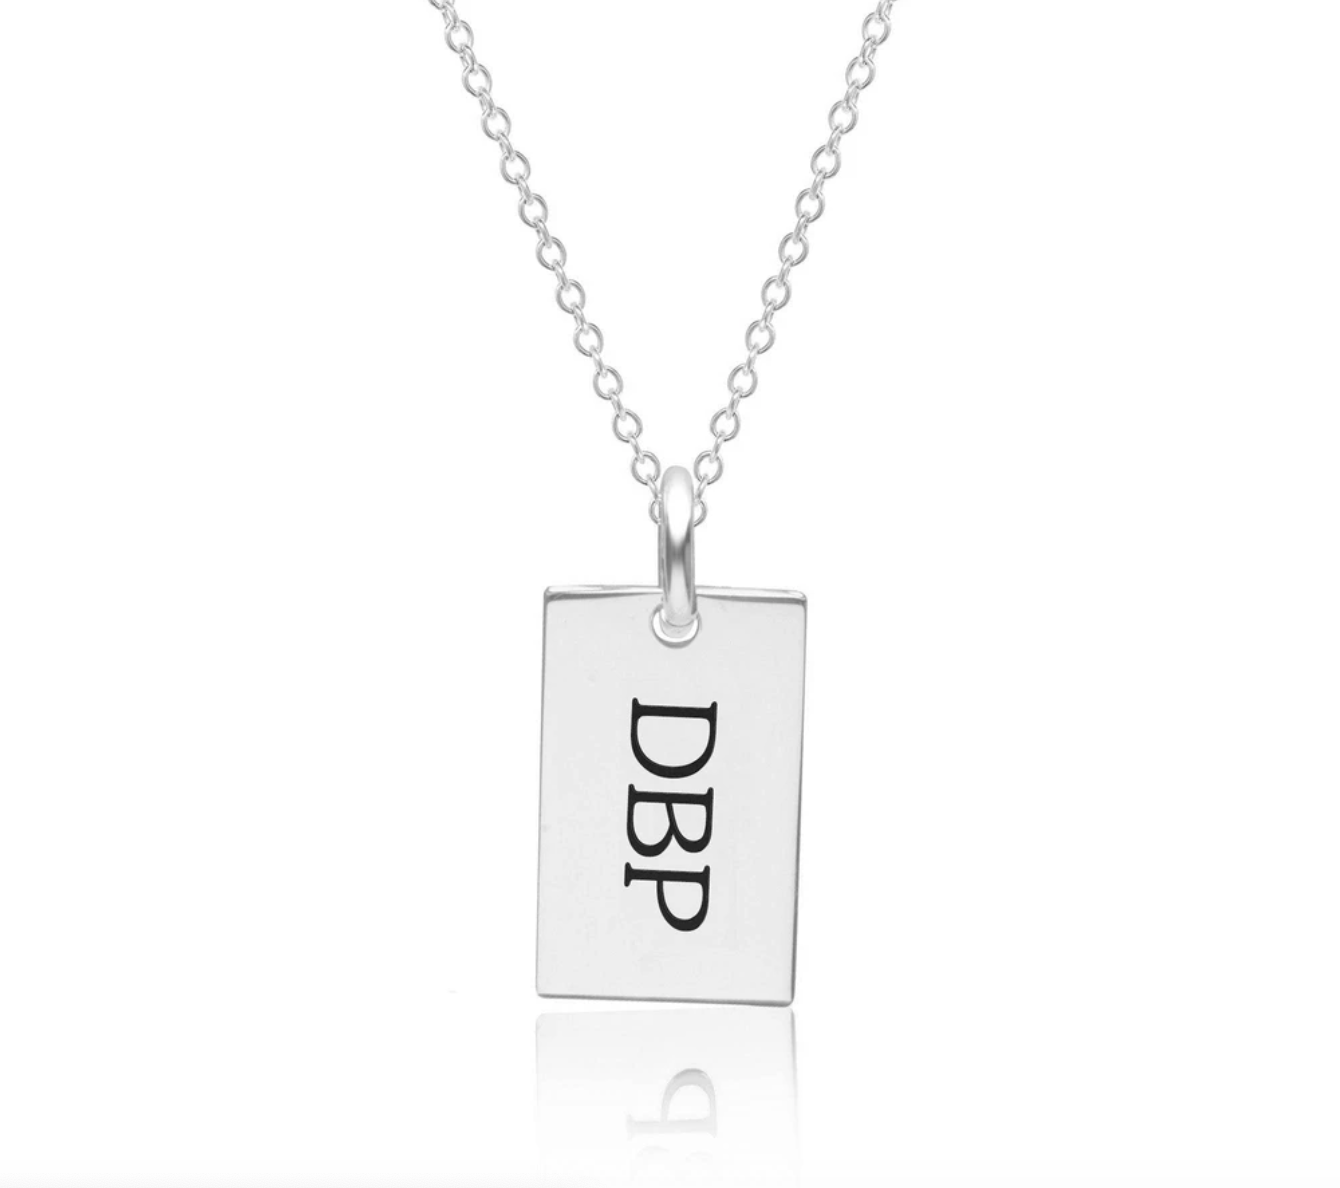 Best Personalized Necklaces